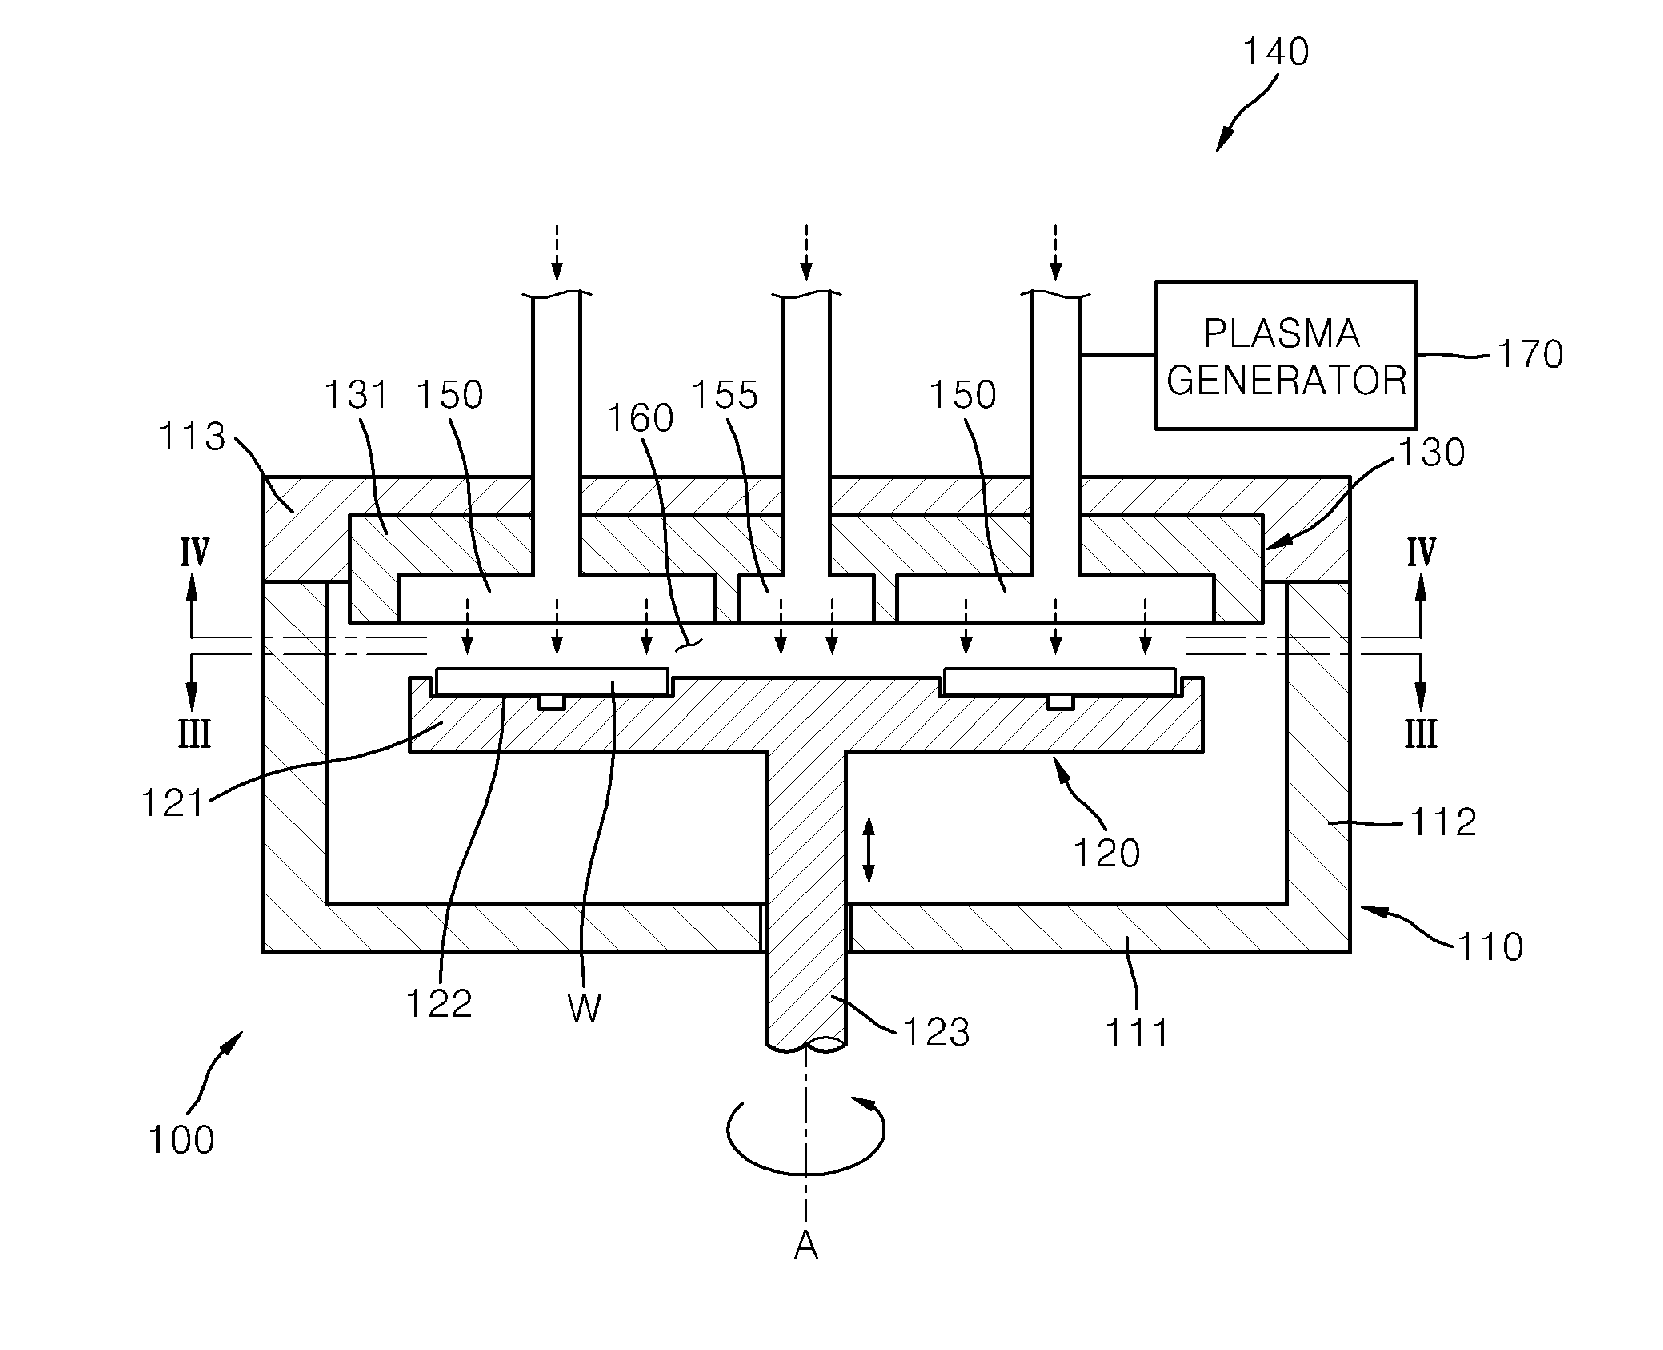 Apparatus, method for depositing thin film on wafer and method for gap-filling trench using the same